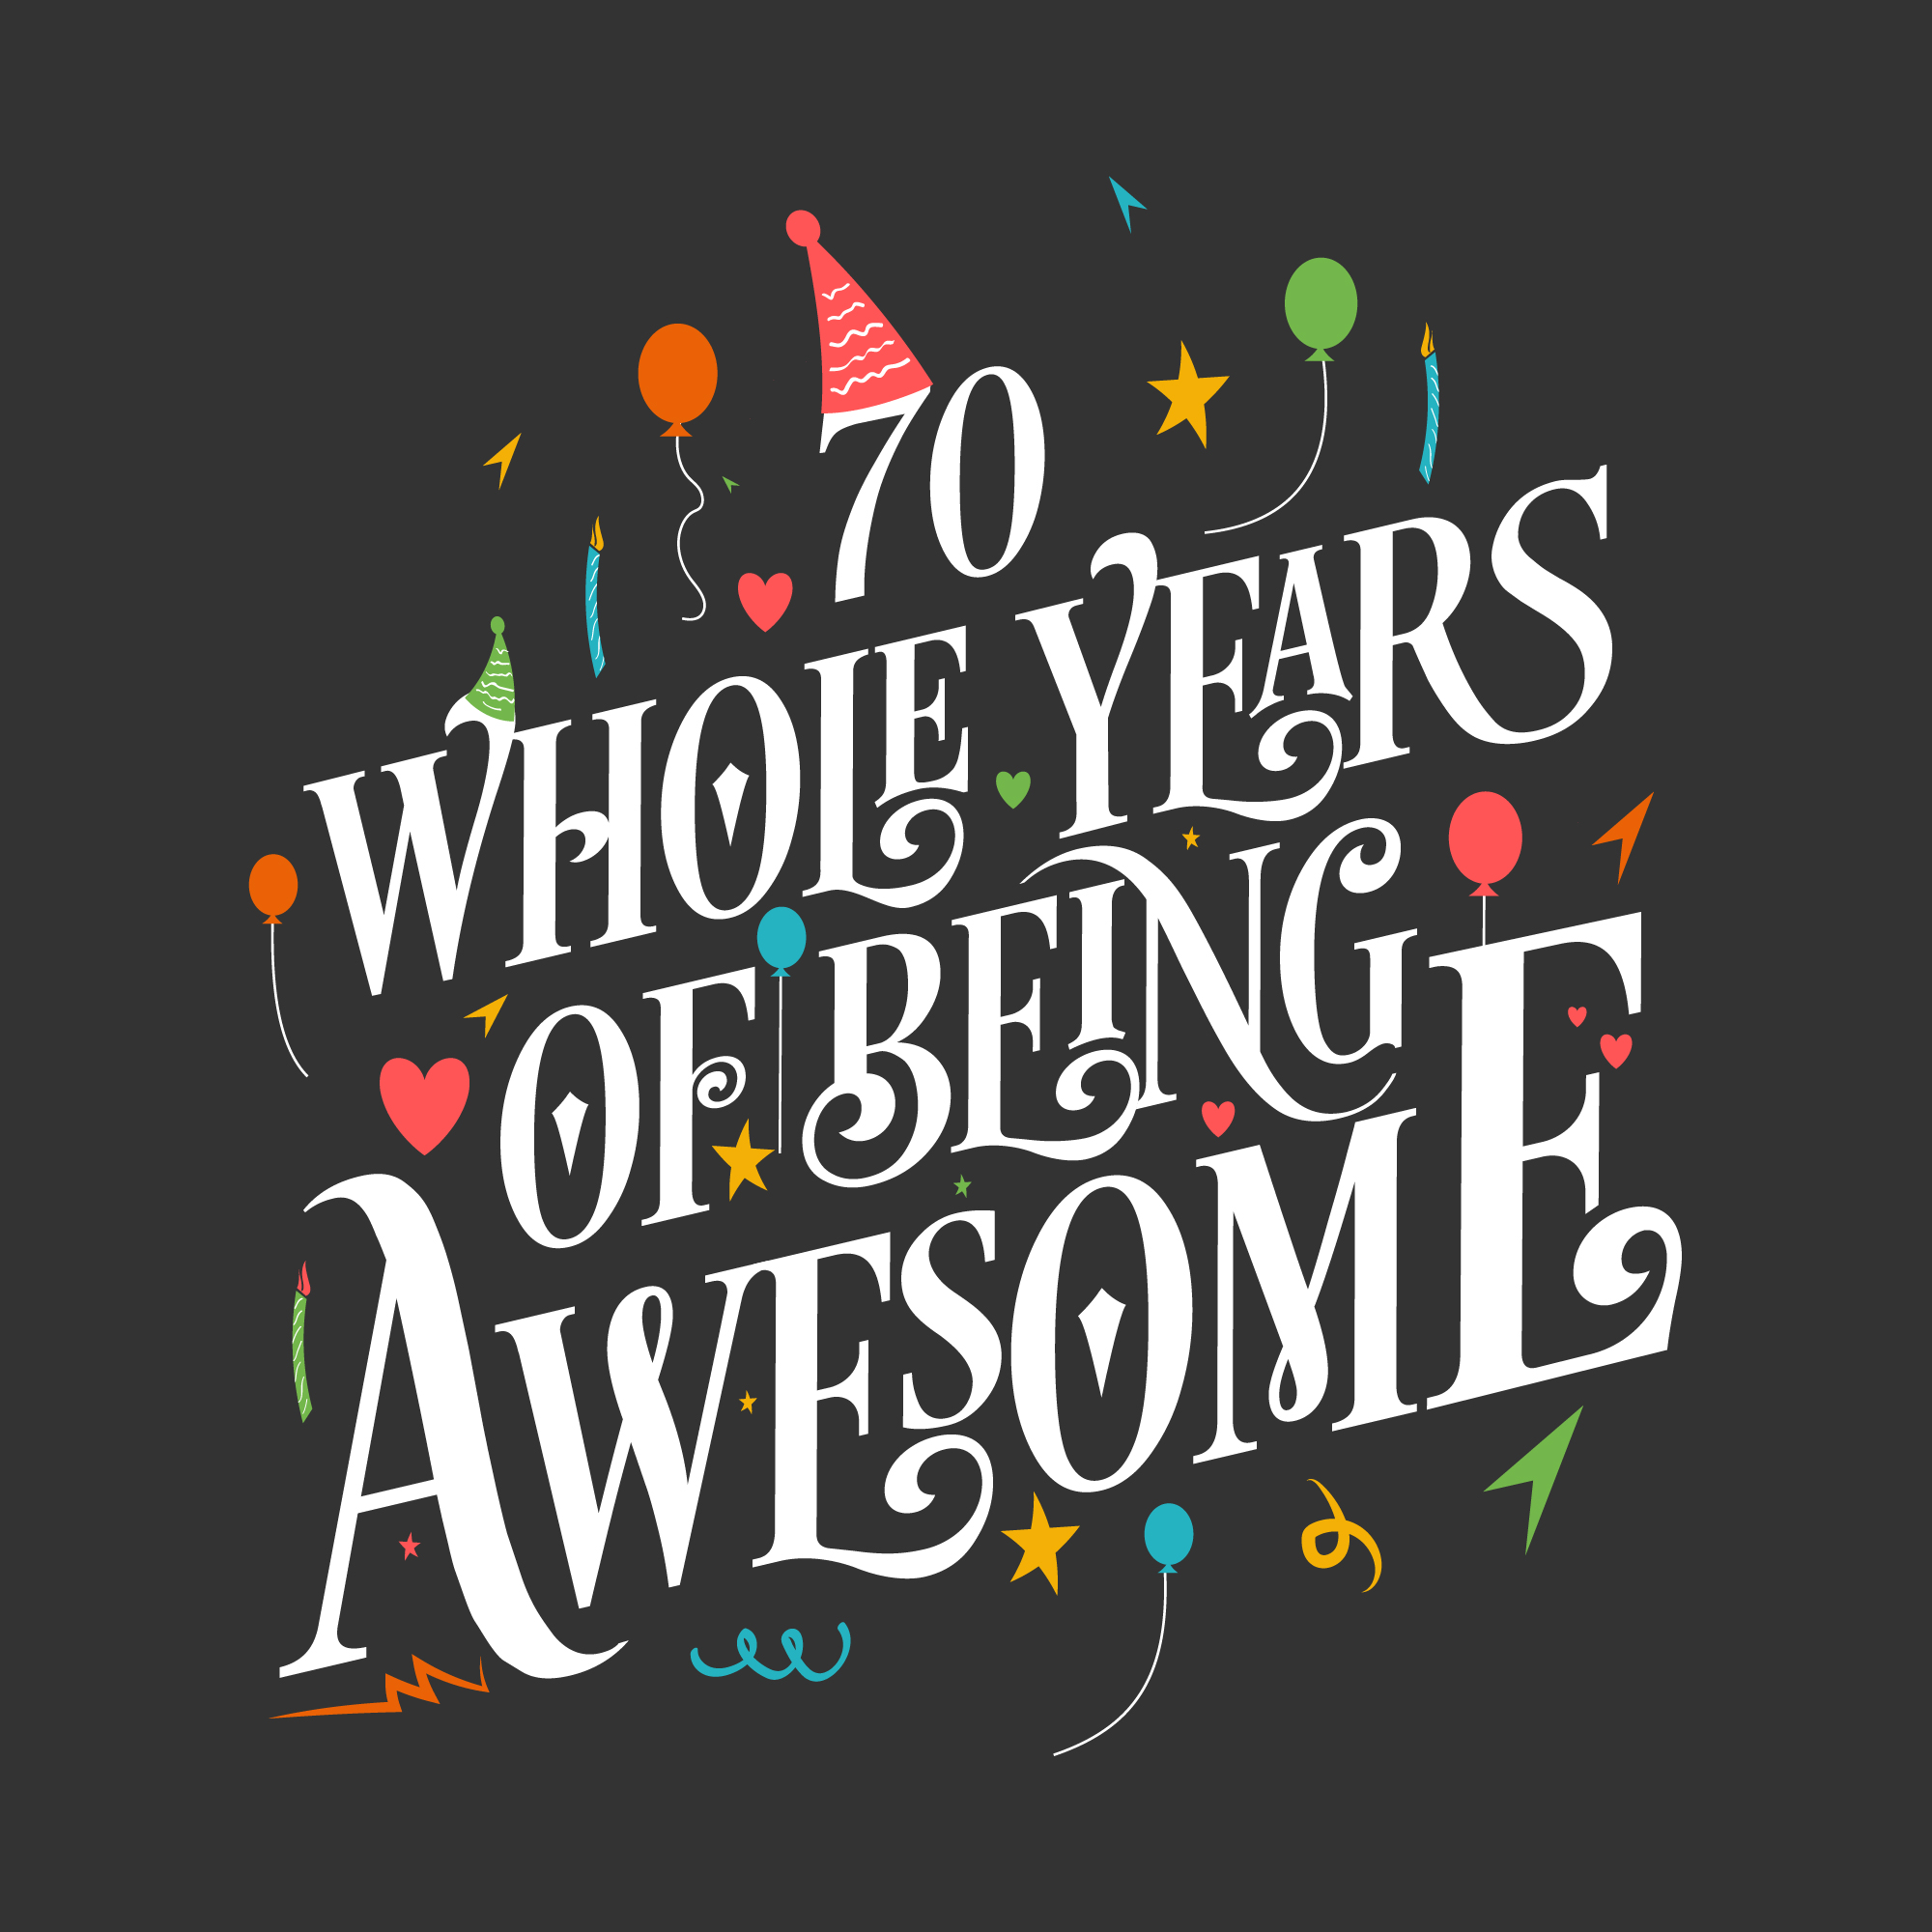 70 whole years of being awesome